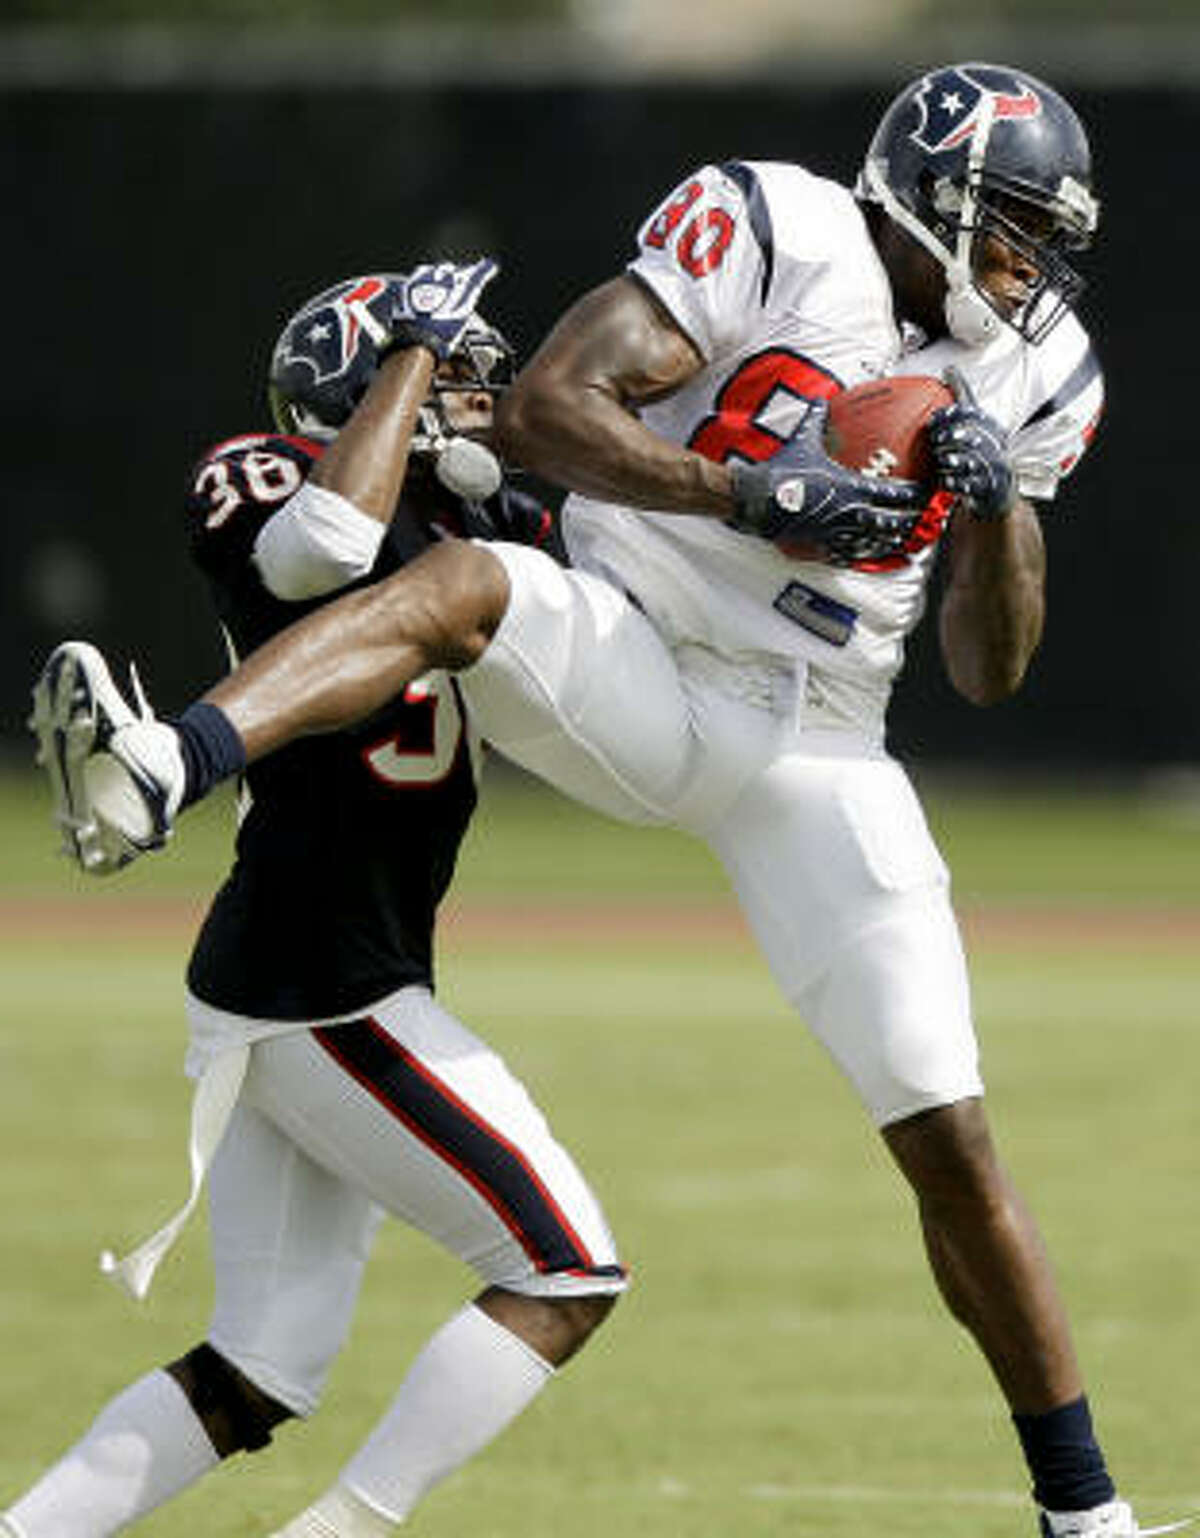 Texans wide receiver Andre Johnson goes up to catch a pass against cornerback DeMarcus Faggins.